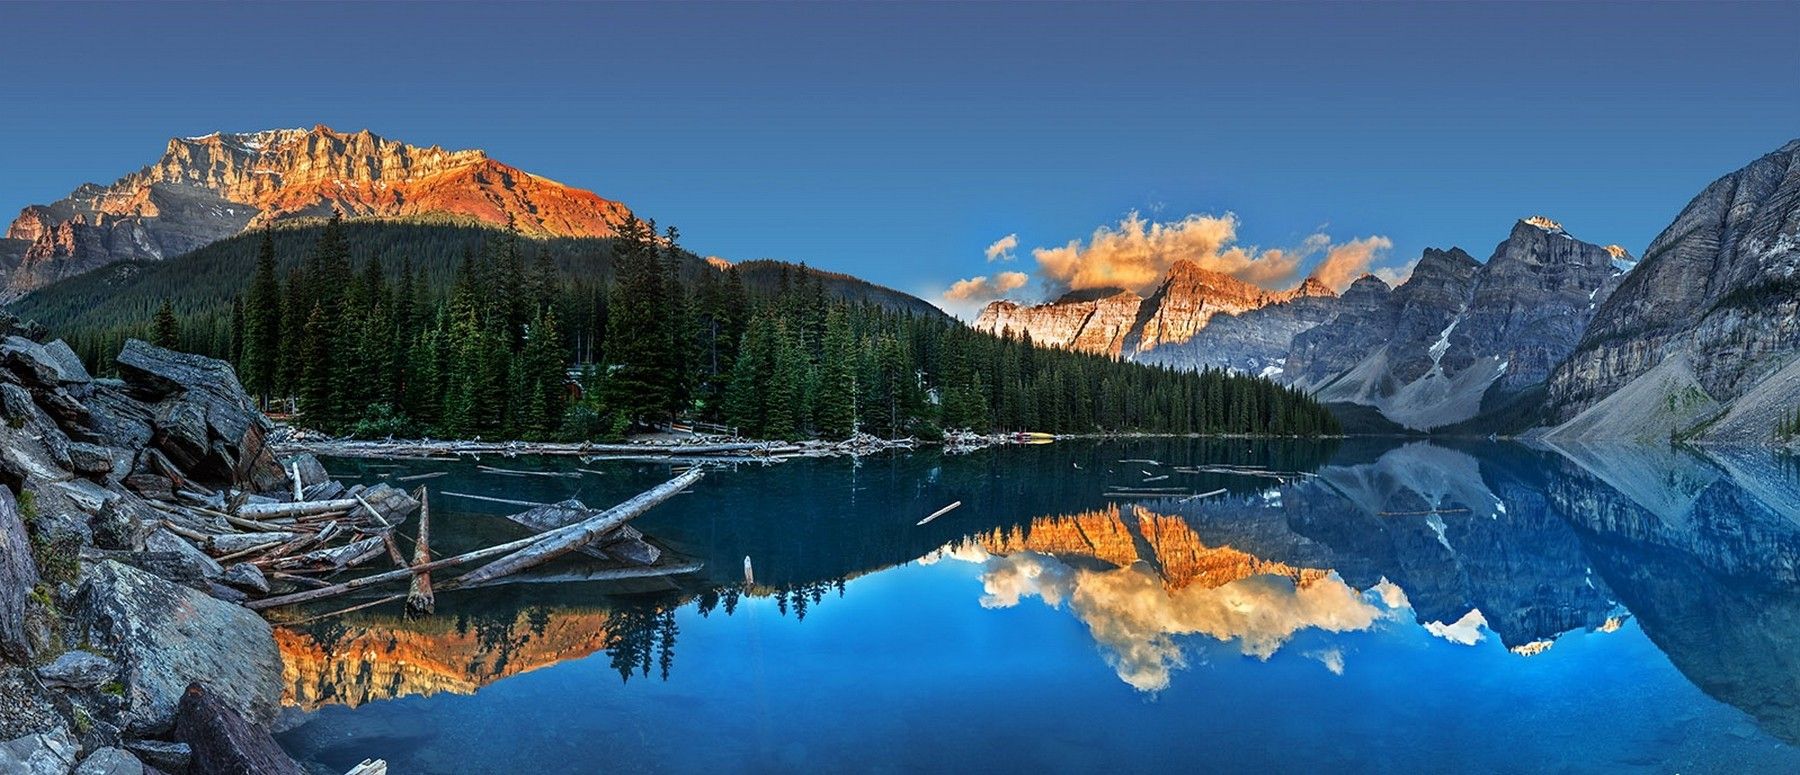 Moraine Lake, Sunset, Summer, Lake, Canada, Mountain, Water, Forest, Cliff, Reflection, Blue, Clouds, Nature, Landscape Wallpaper HD / Desktop and Mobile Background